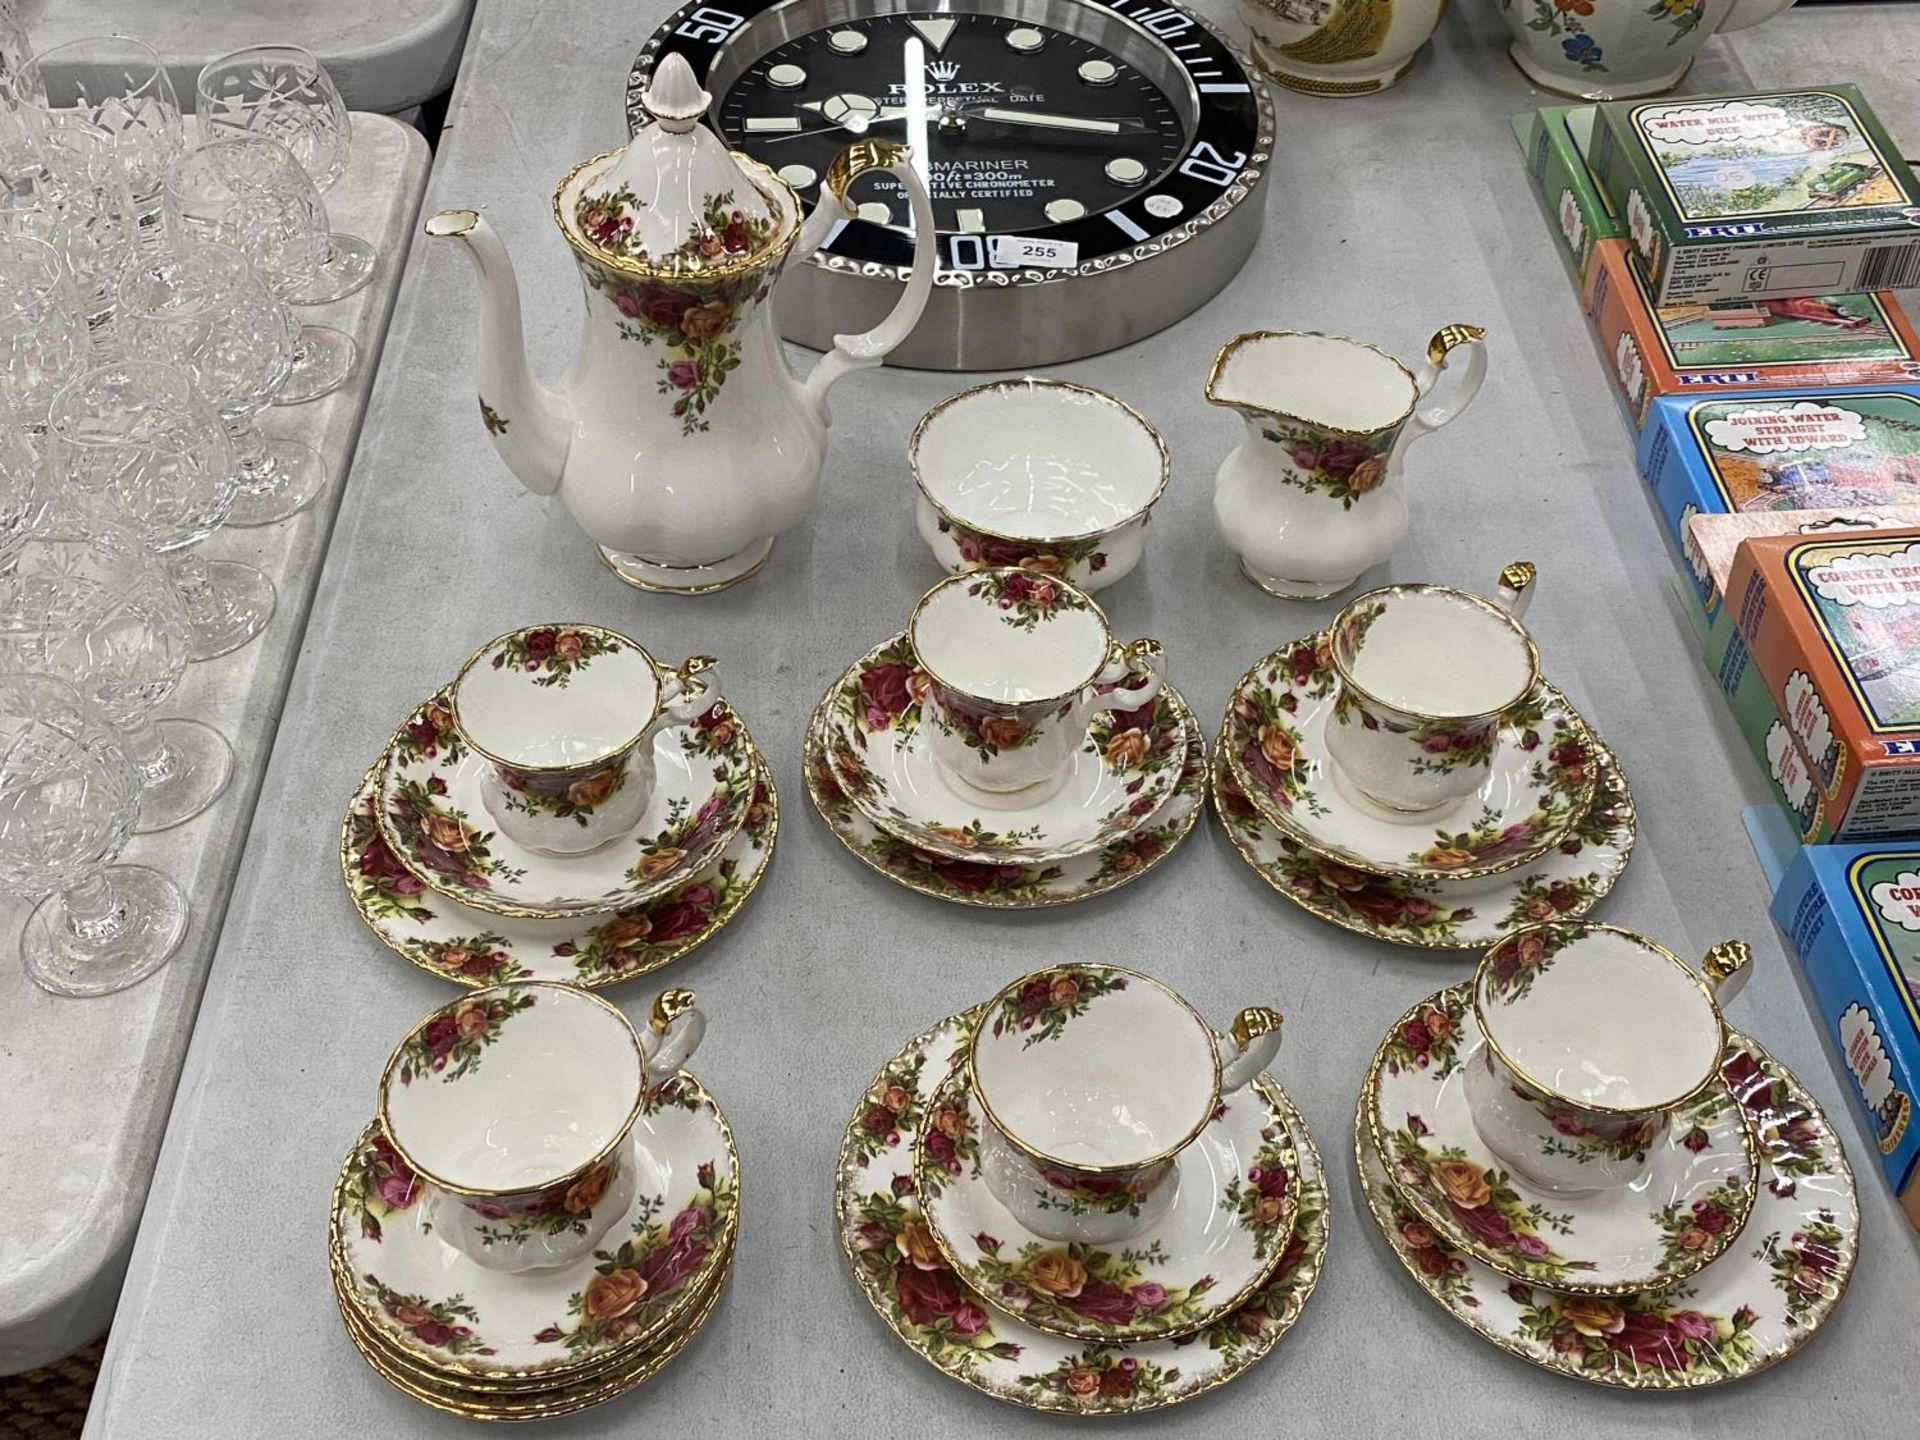 A ROYAL ALBERT COFFEE SET TO INCLUDE A COFFEE POT, SUGAR BOWL, CREAM JUG, CUPS, SAUCERS AND SIDE